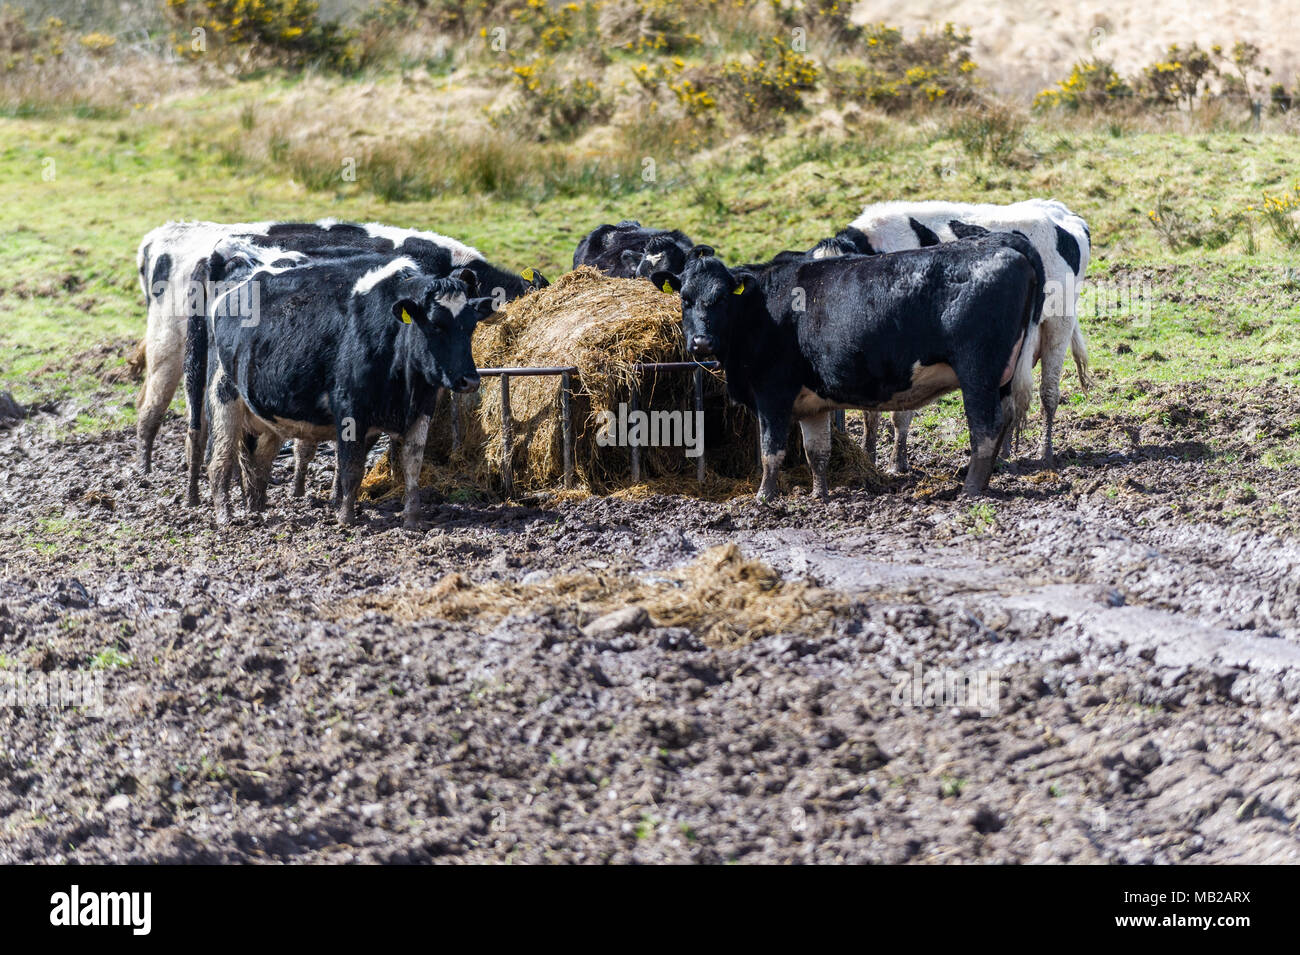 Ballydehob, Ireland. 6th Apr, 2018. A herd of dairy cows eat a bail of bought in fodder in a field of mud.  The poor weather has led to no grass growth with fodder having to be imported from the UK to help desperate farmers. Credit: Andy Gibson/Alamy Live News. Stock Photo